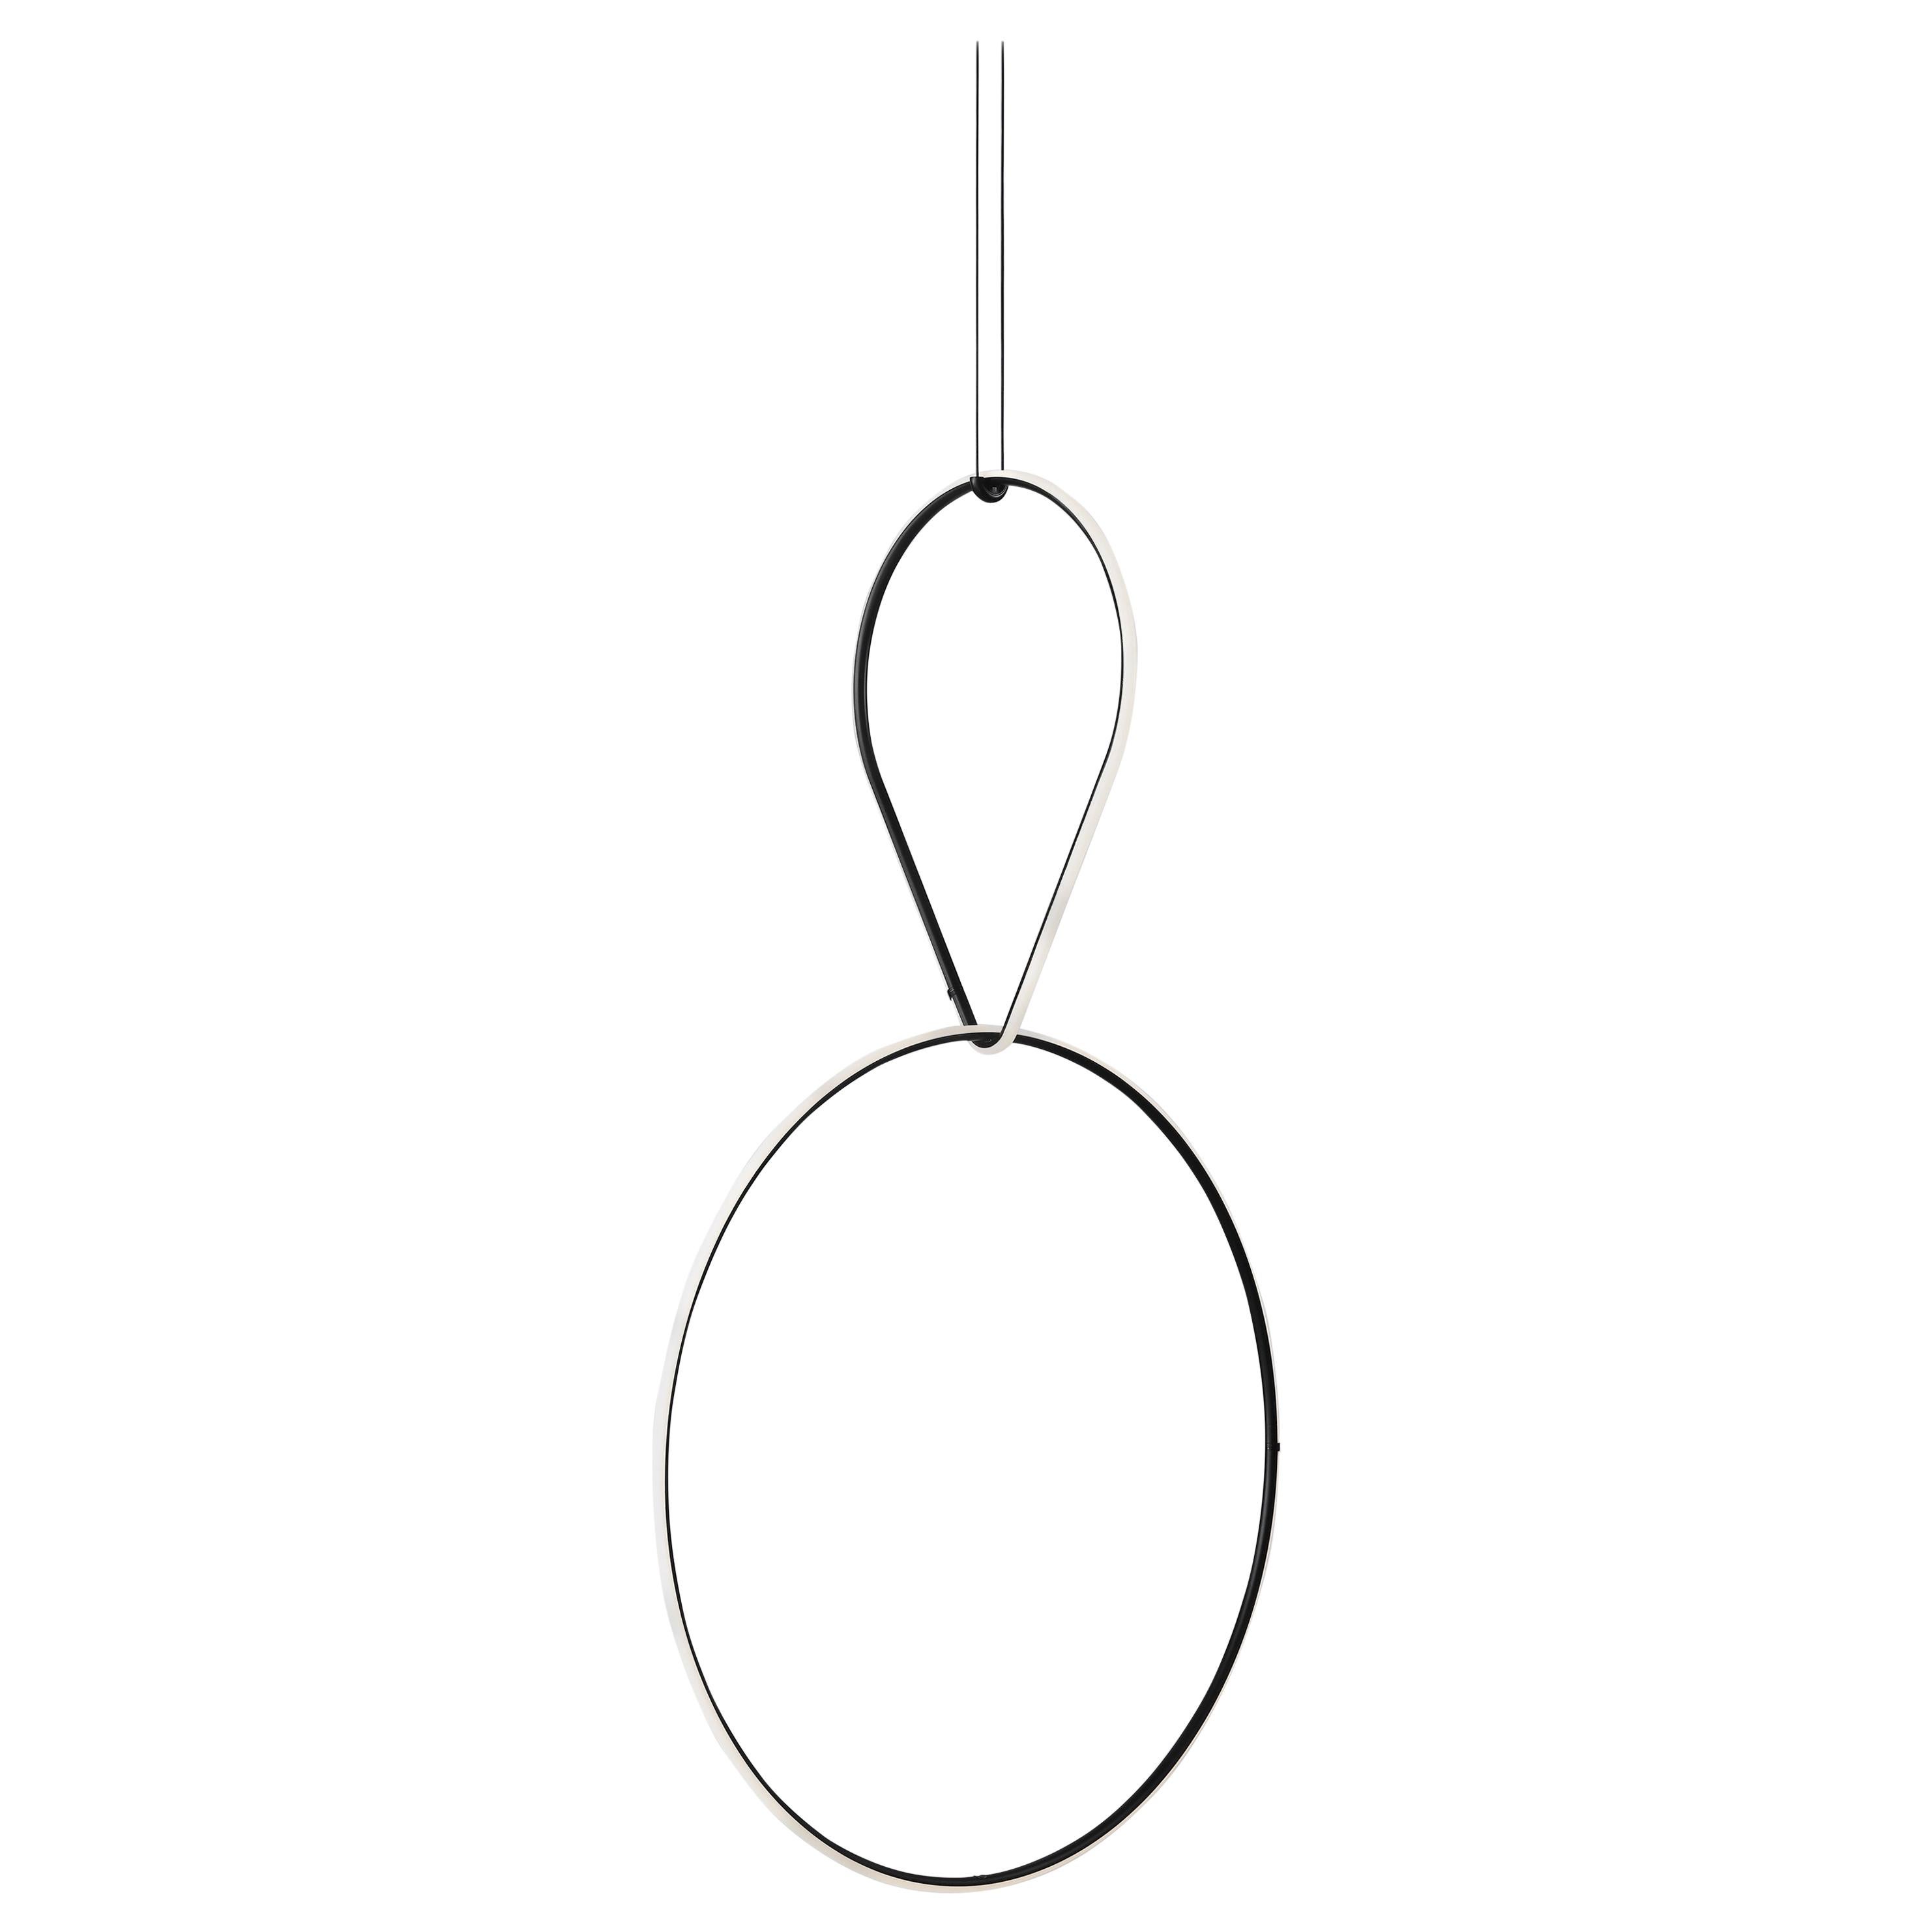 FLOS Drop Down and Large Circle Arrangements Light by Michael Anastassiades